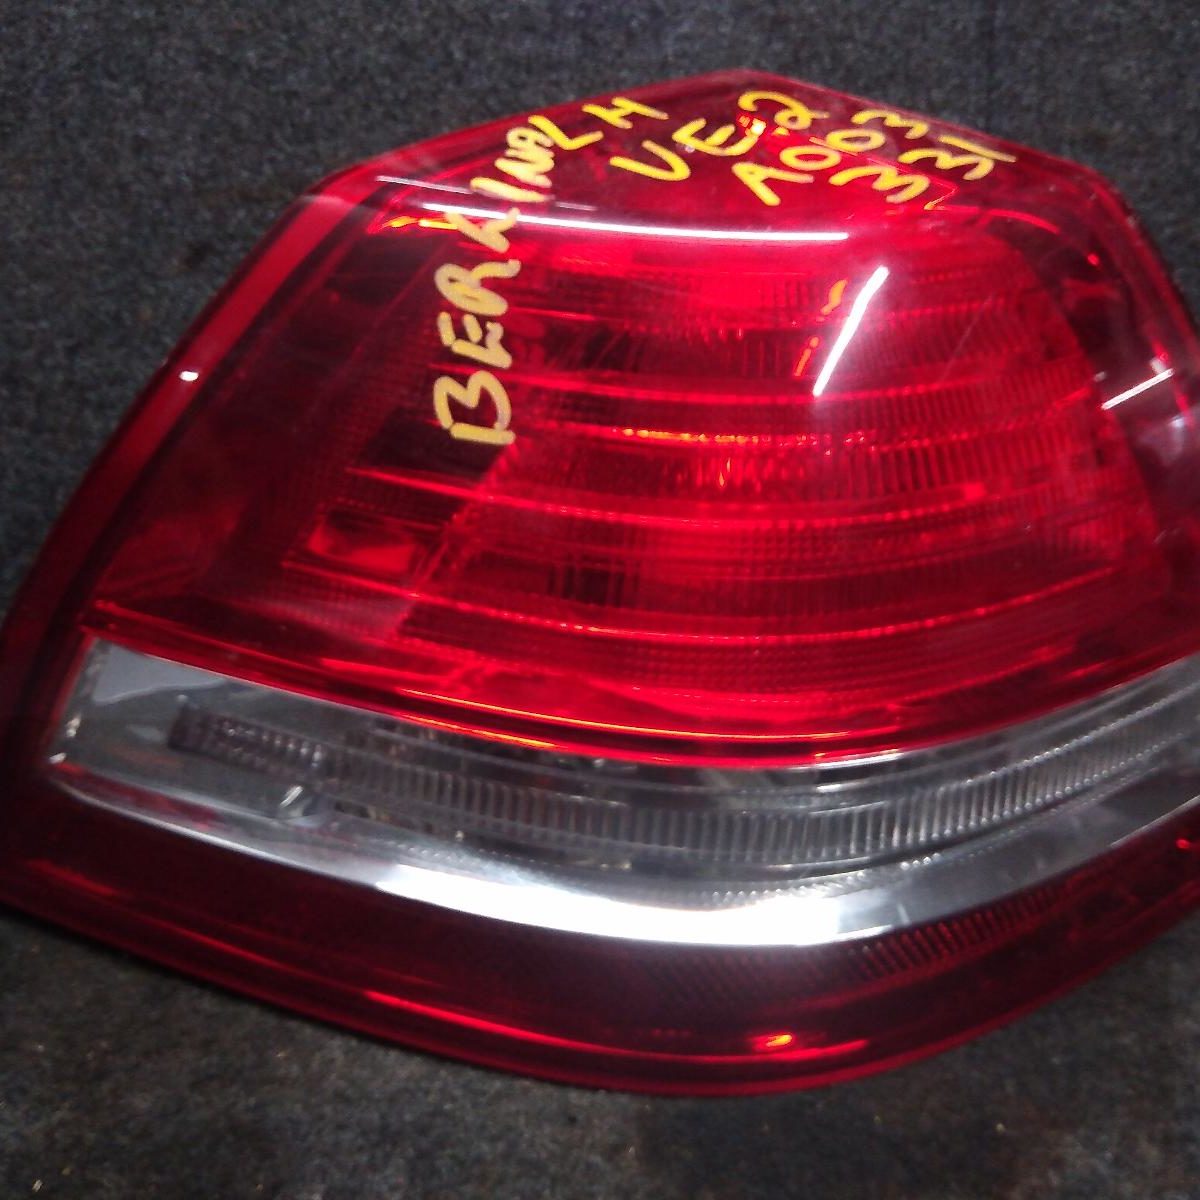 2011 HOLDEN COMMODORE LEFT TAILLIGHT